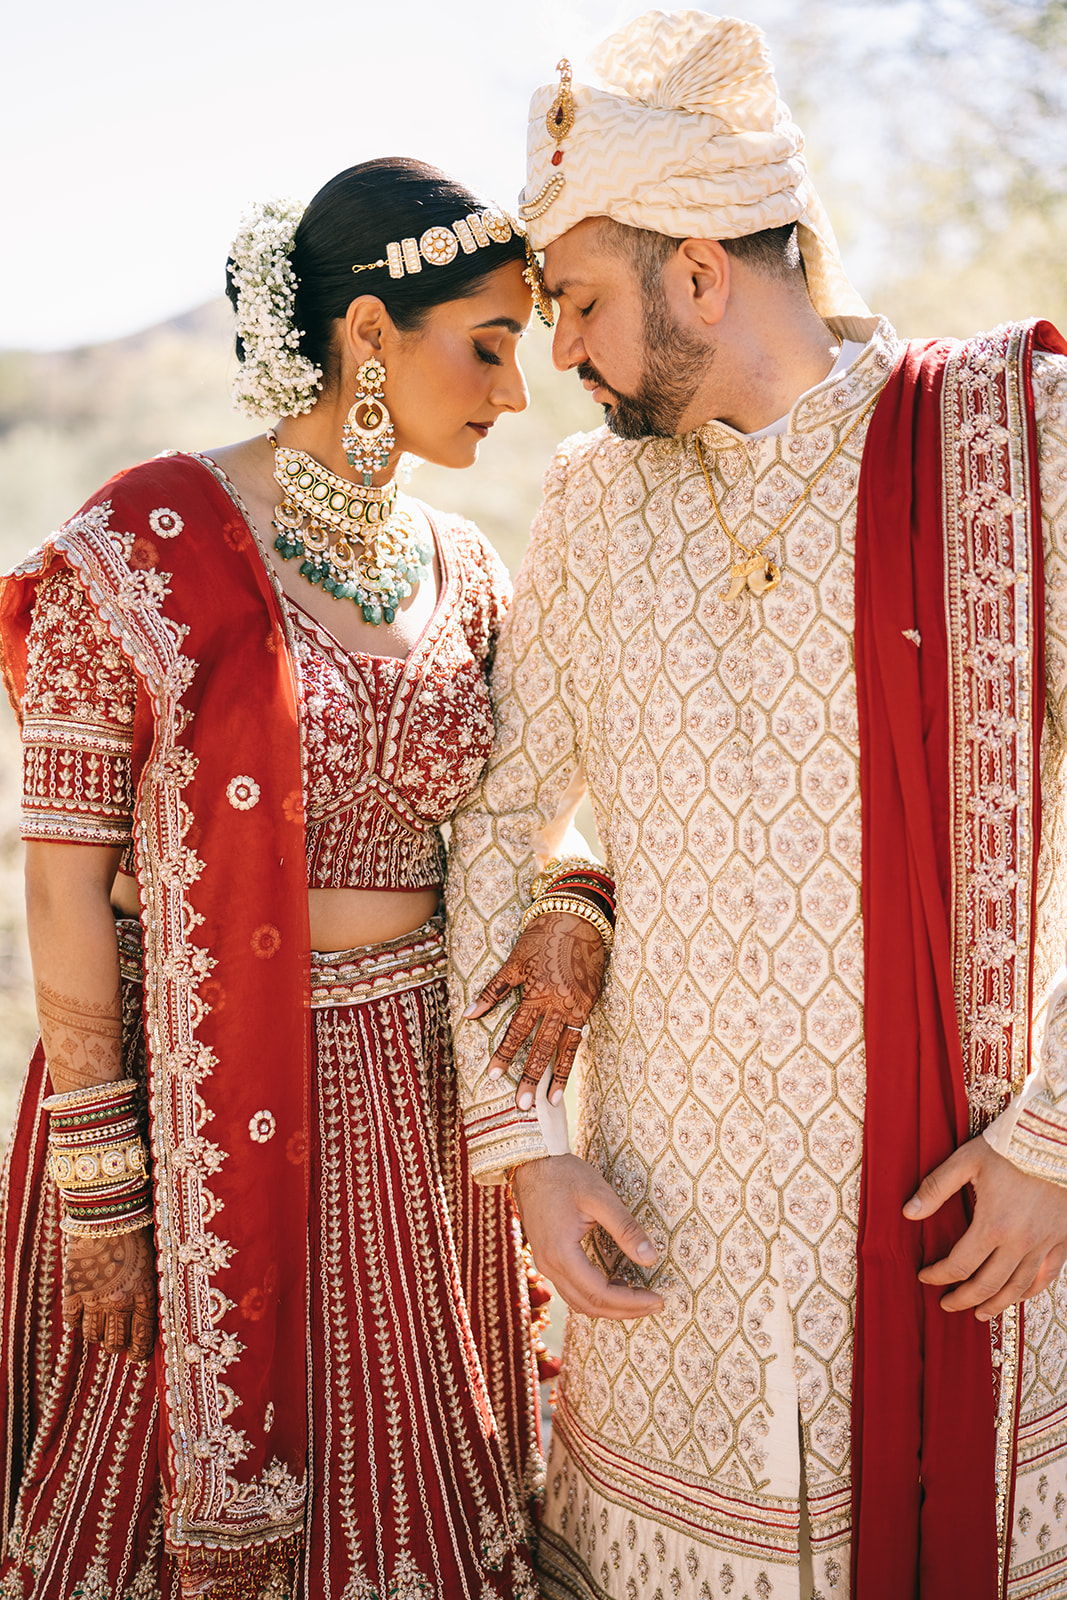 Indian bride and groom standing side by side touching foreheads and looking down